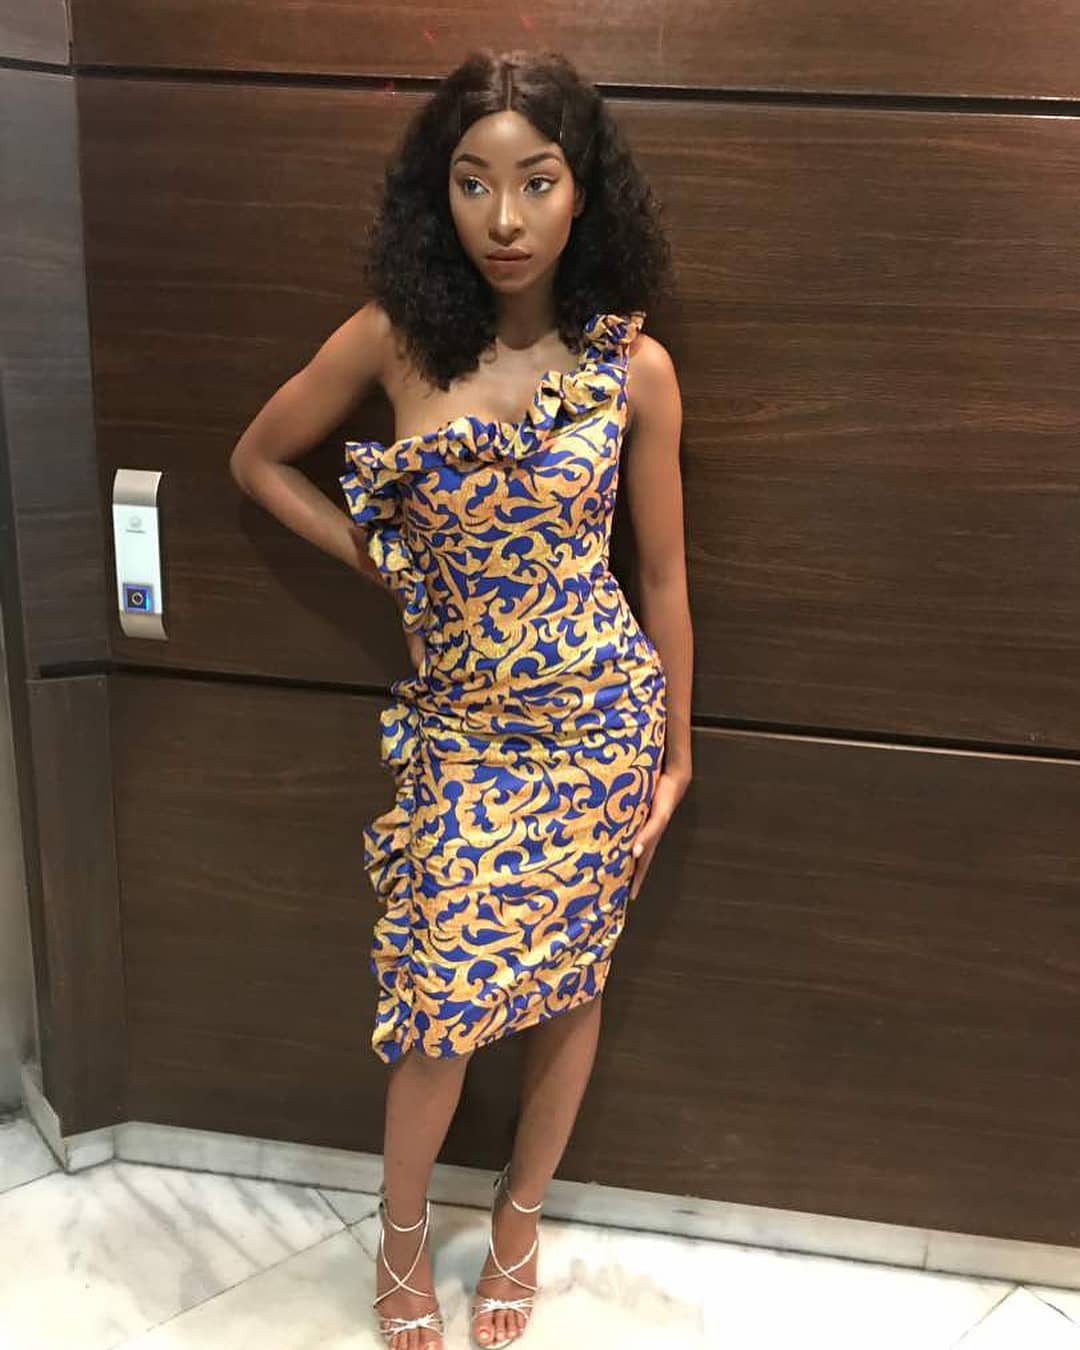 Start Off April In Stylish Ankara Outfits